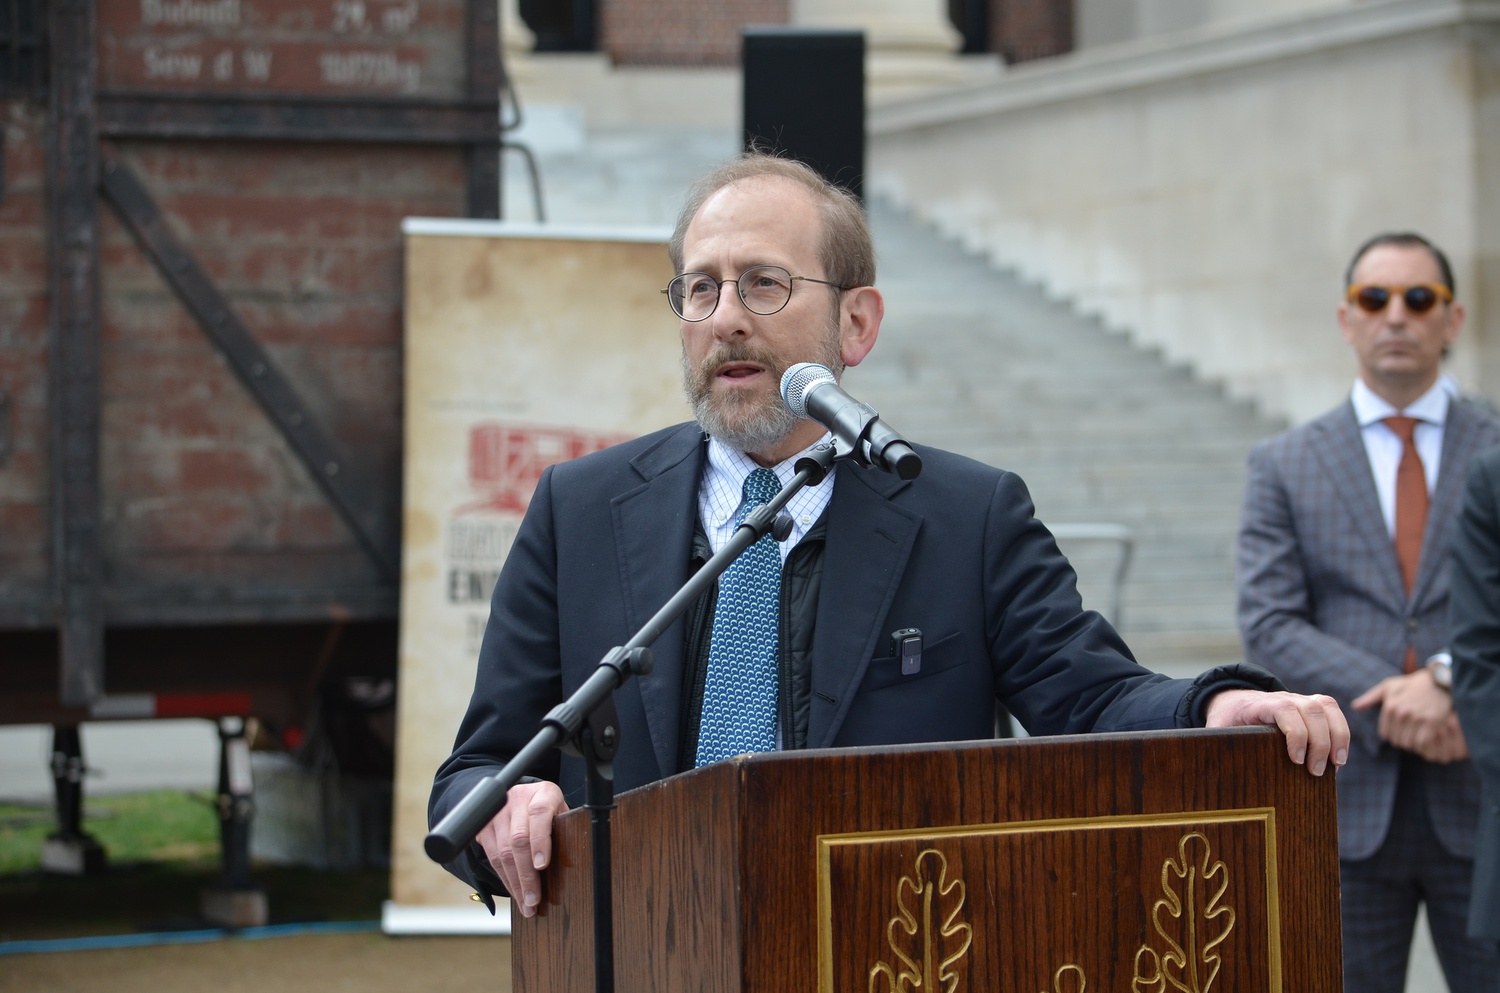 University Provost Alan M. Garber spoke at the opening ceremony of the Hate Ends Now touring exhibit, which aims to combat hatred and educate visitors about the Holocaust.